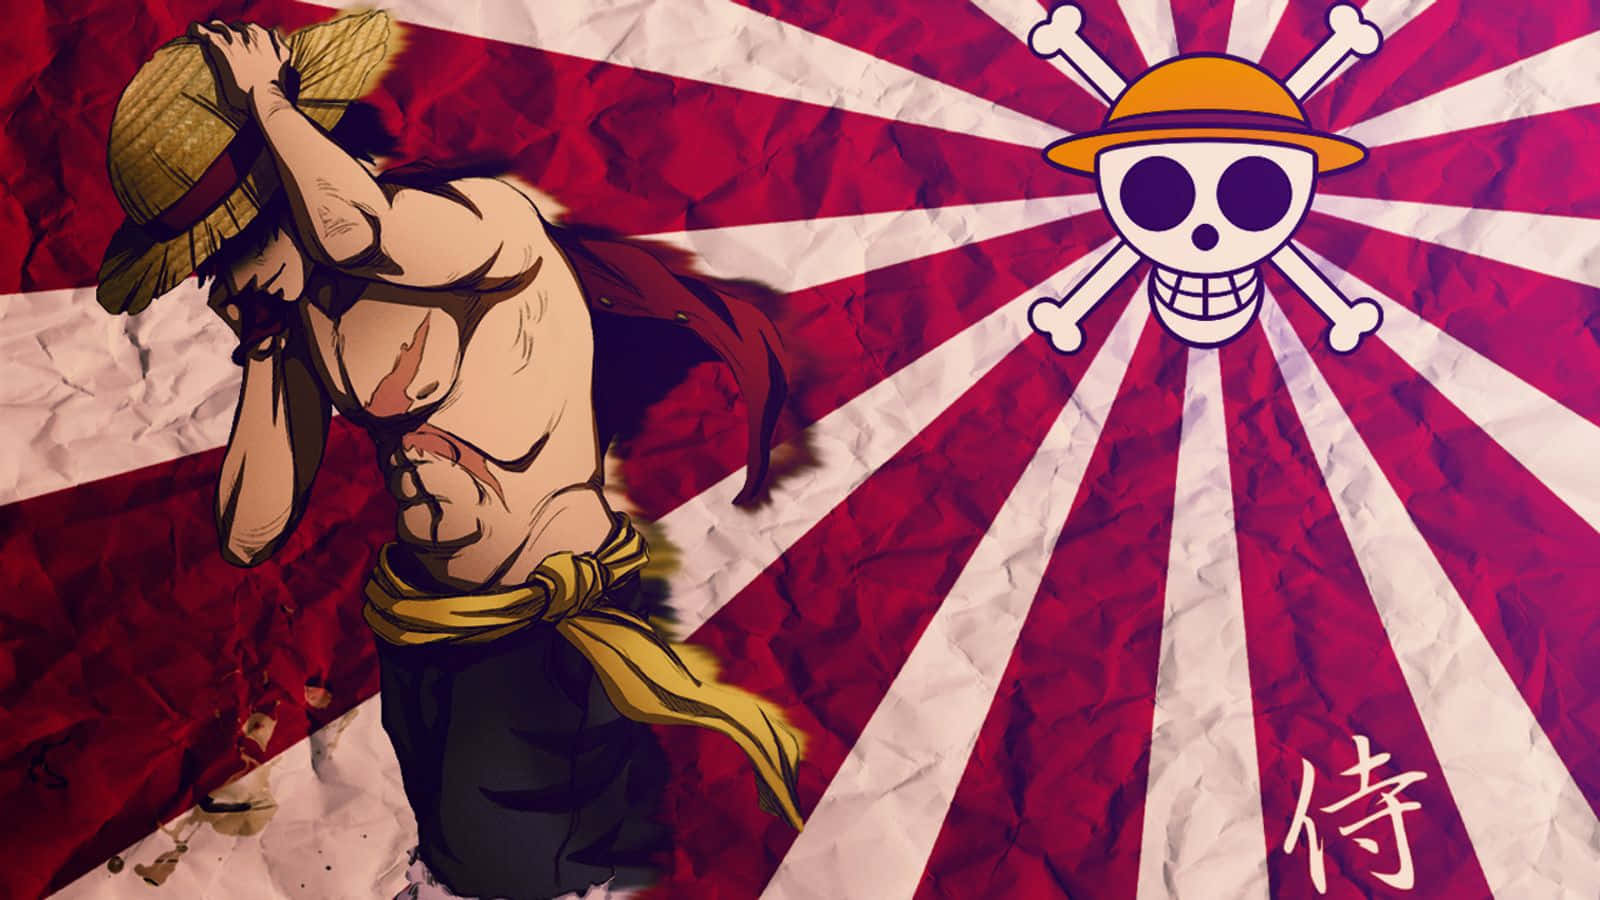 “Cool Luffy showing off his iconic Straw Hat” Wallpaper